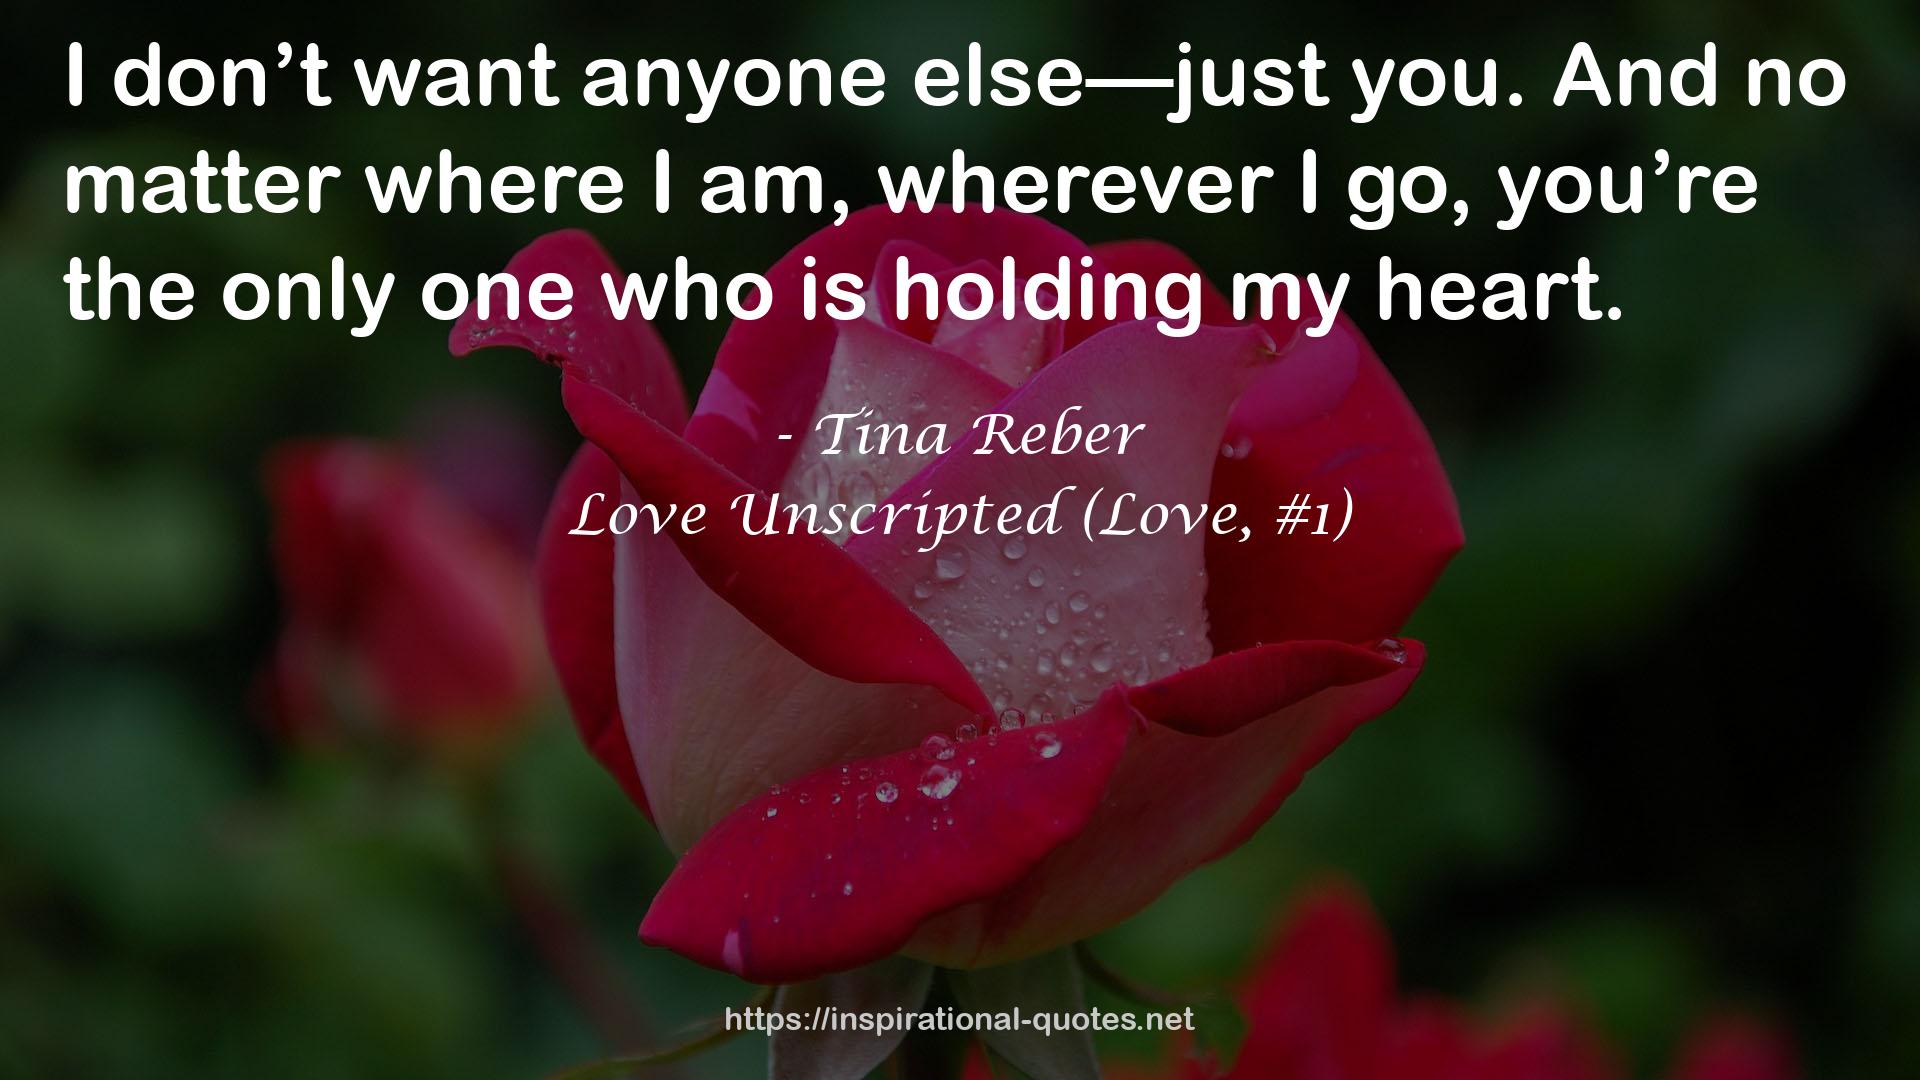 Love Unscripted (Love, #1) QUOTES